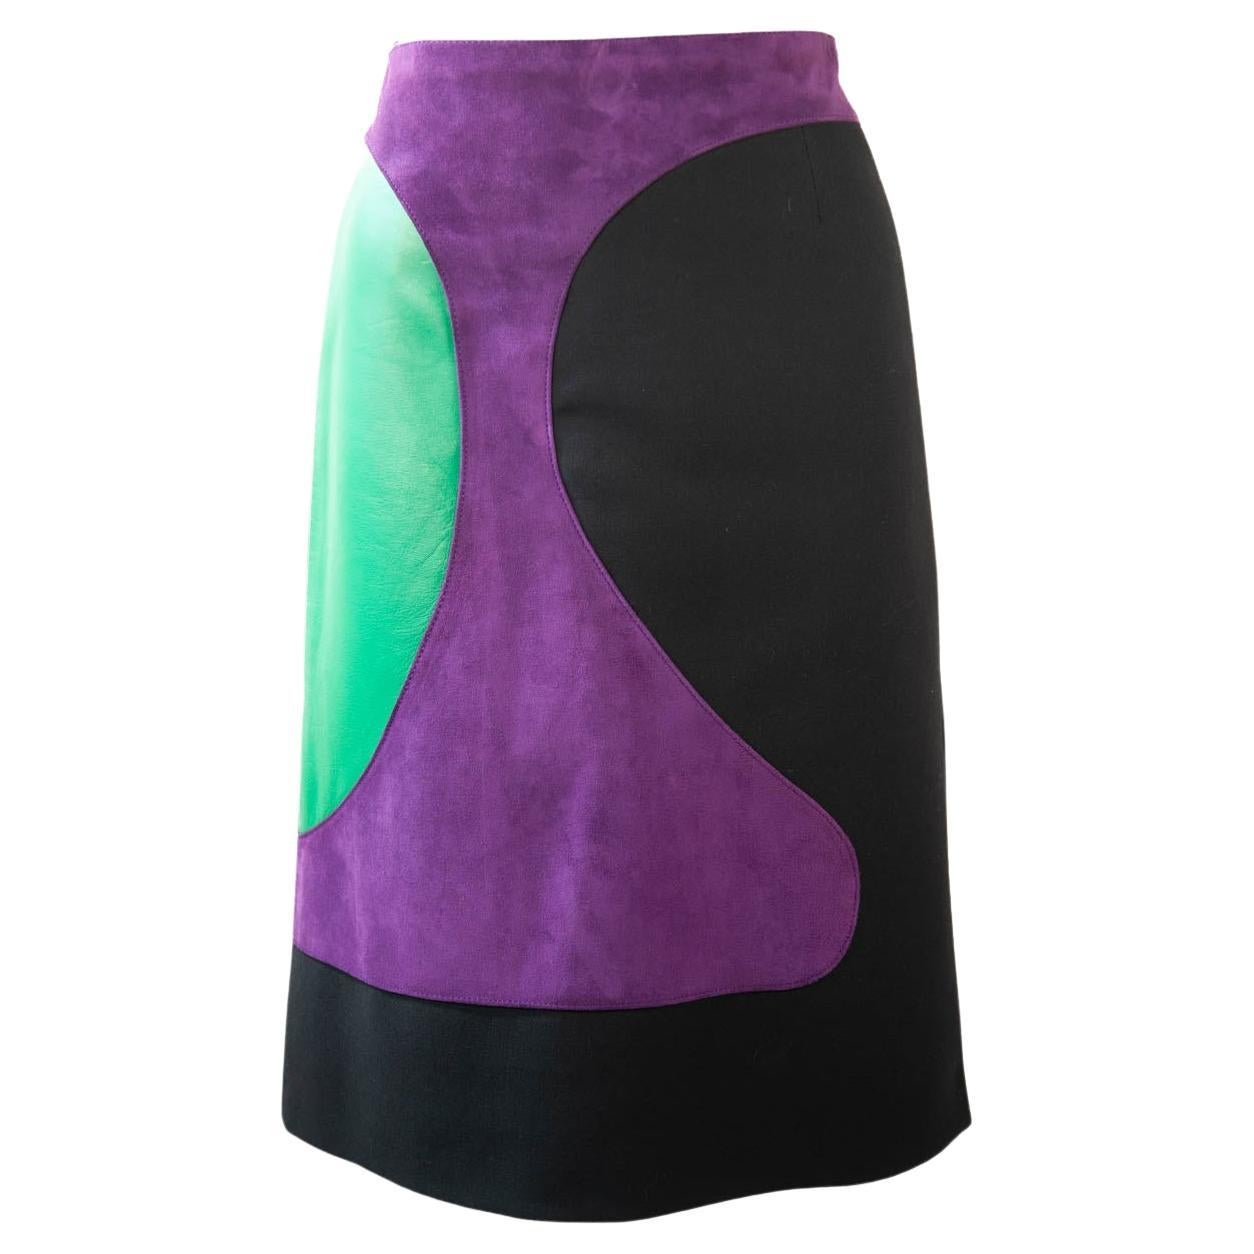 Pierre Cardin Paris, MOD, Purple, Suede, Green Leather and Wool Skirt, 1960s